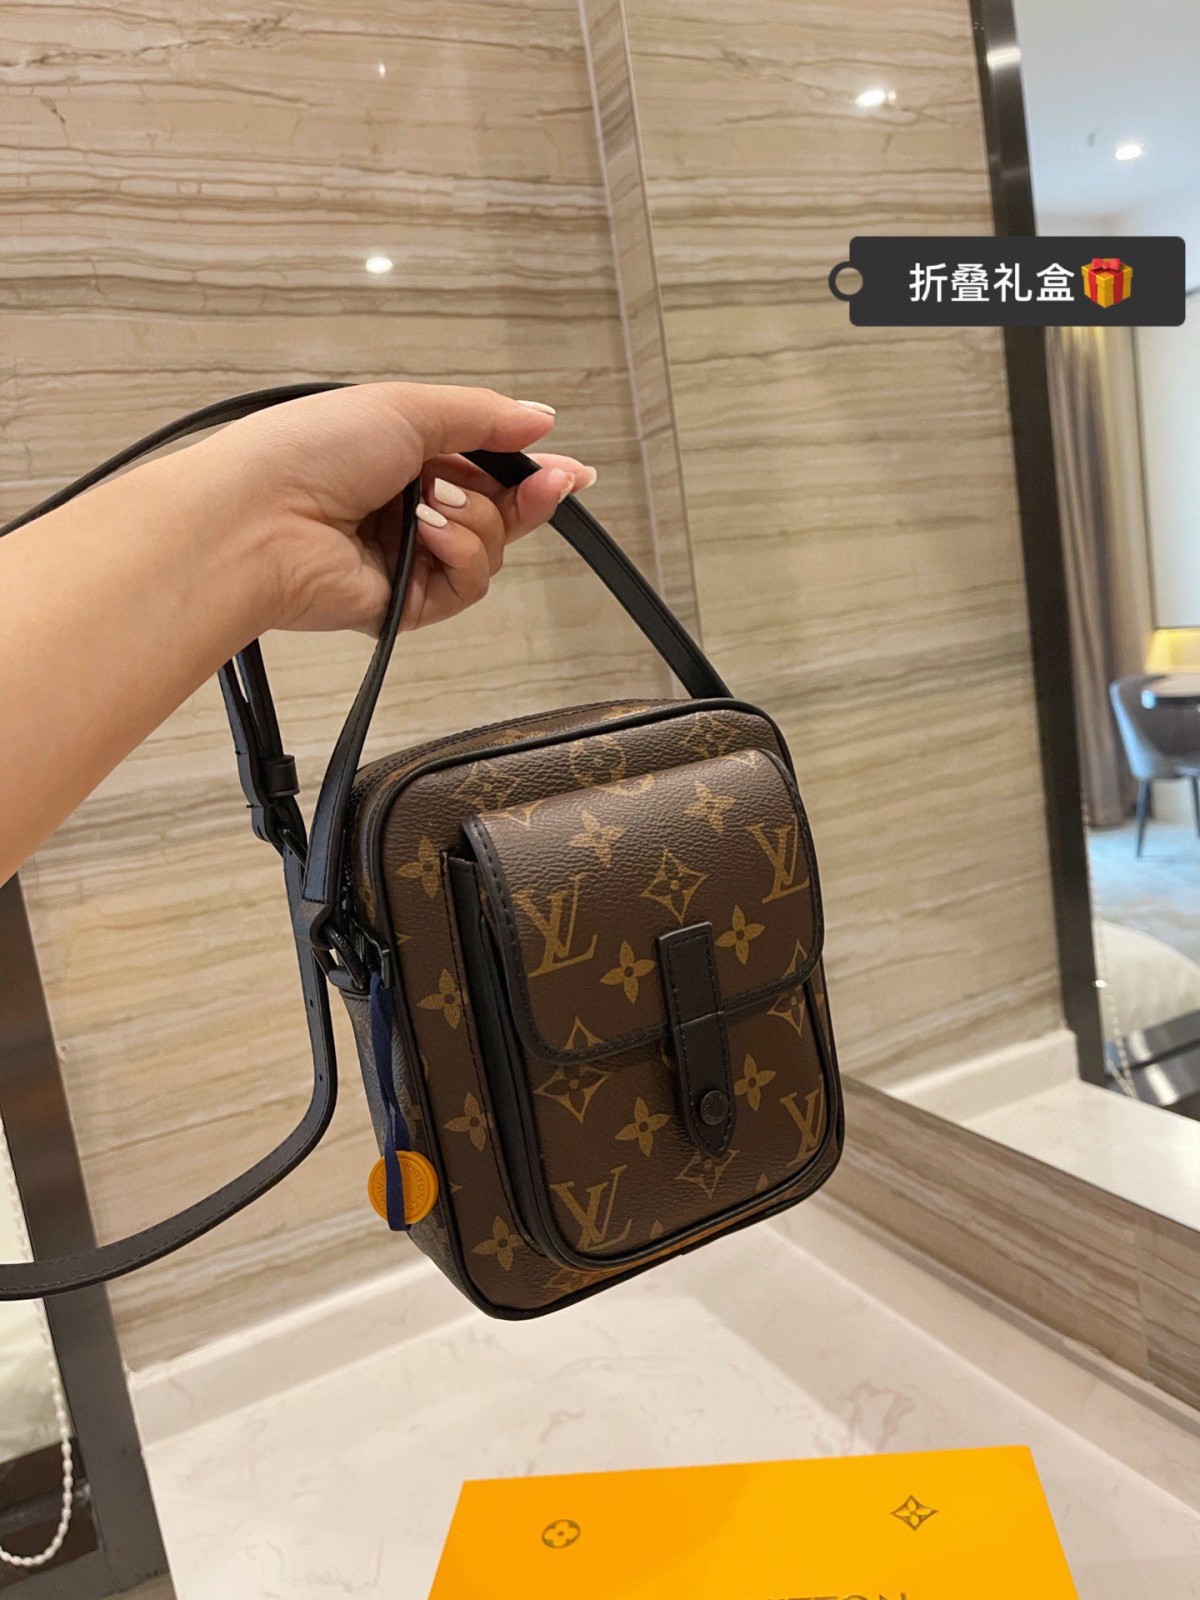 The best designer bag classification in 21 types, and the latest trend analysis (2022 Edition)-Best Quality Fake designer Bag Review, Replica designer bag ru